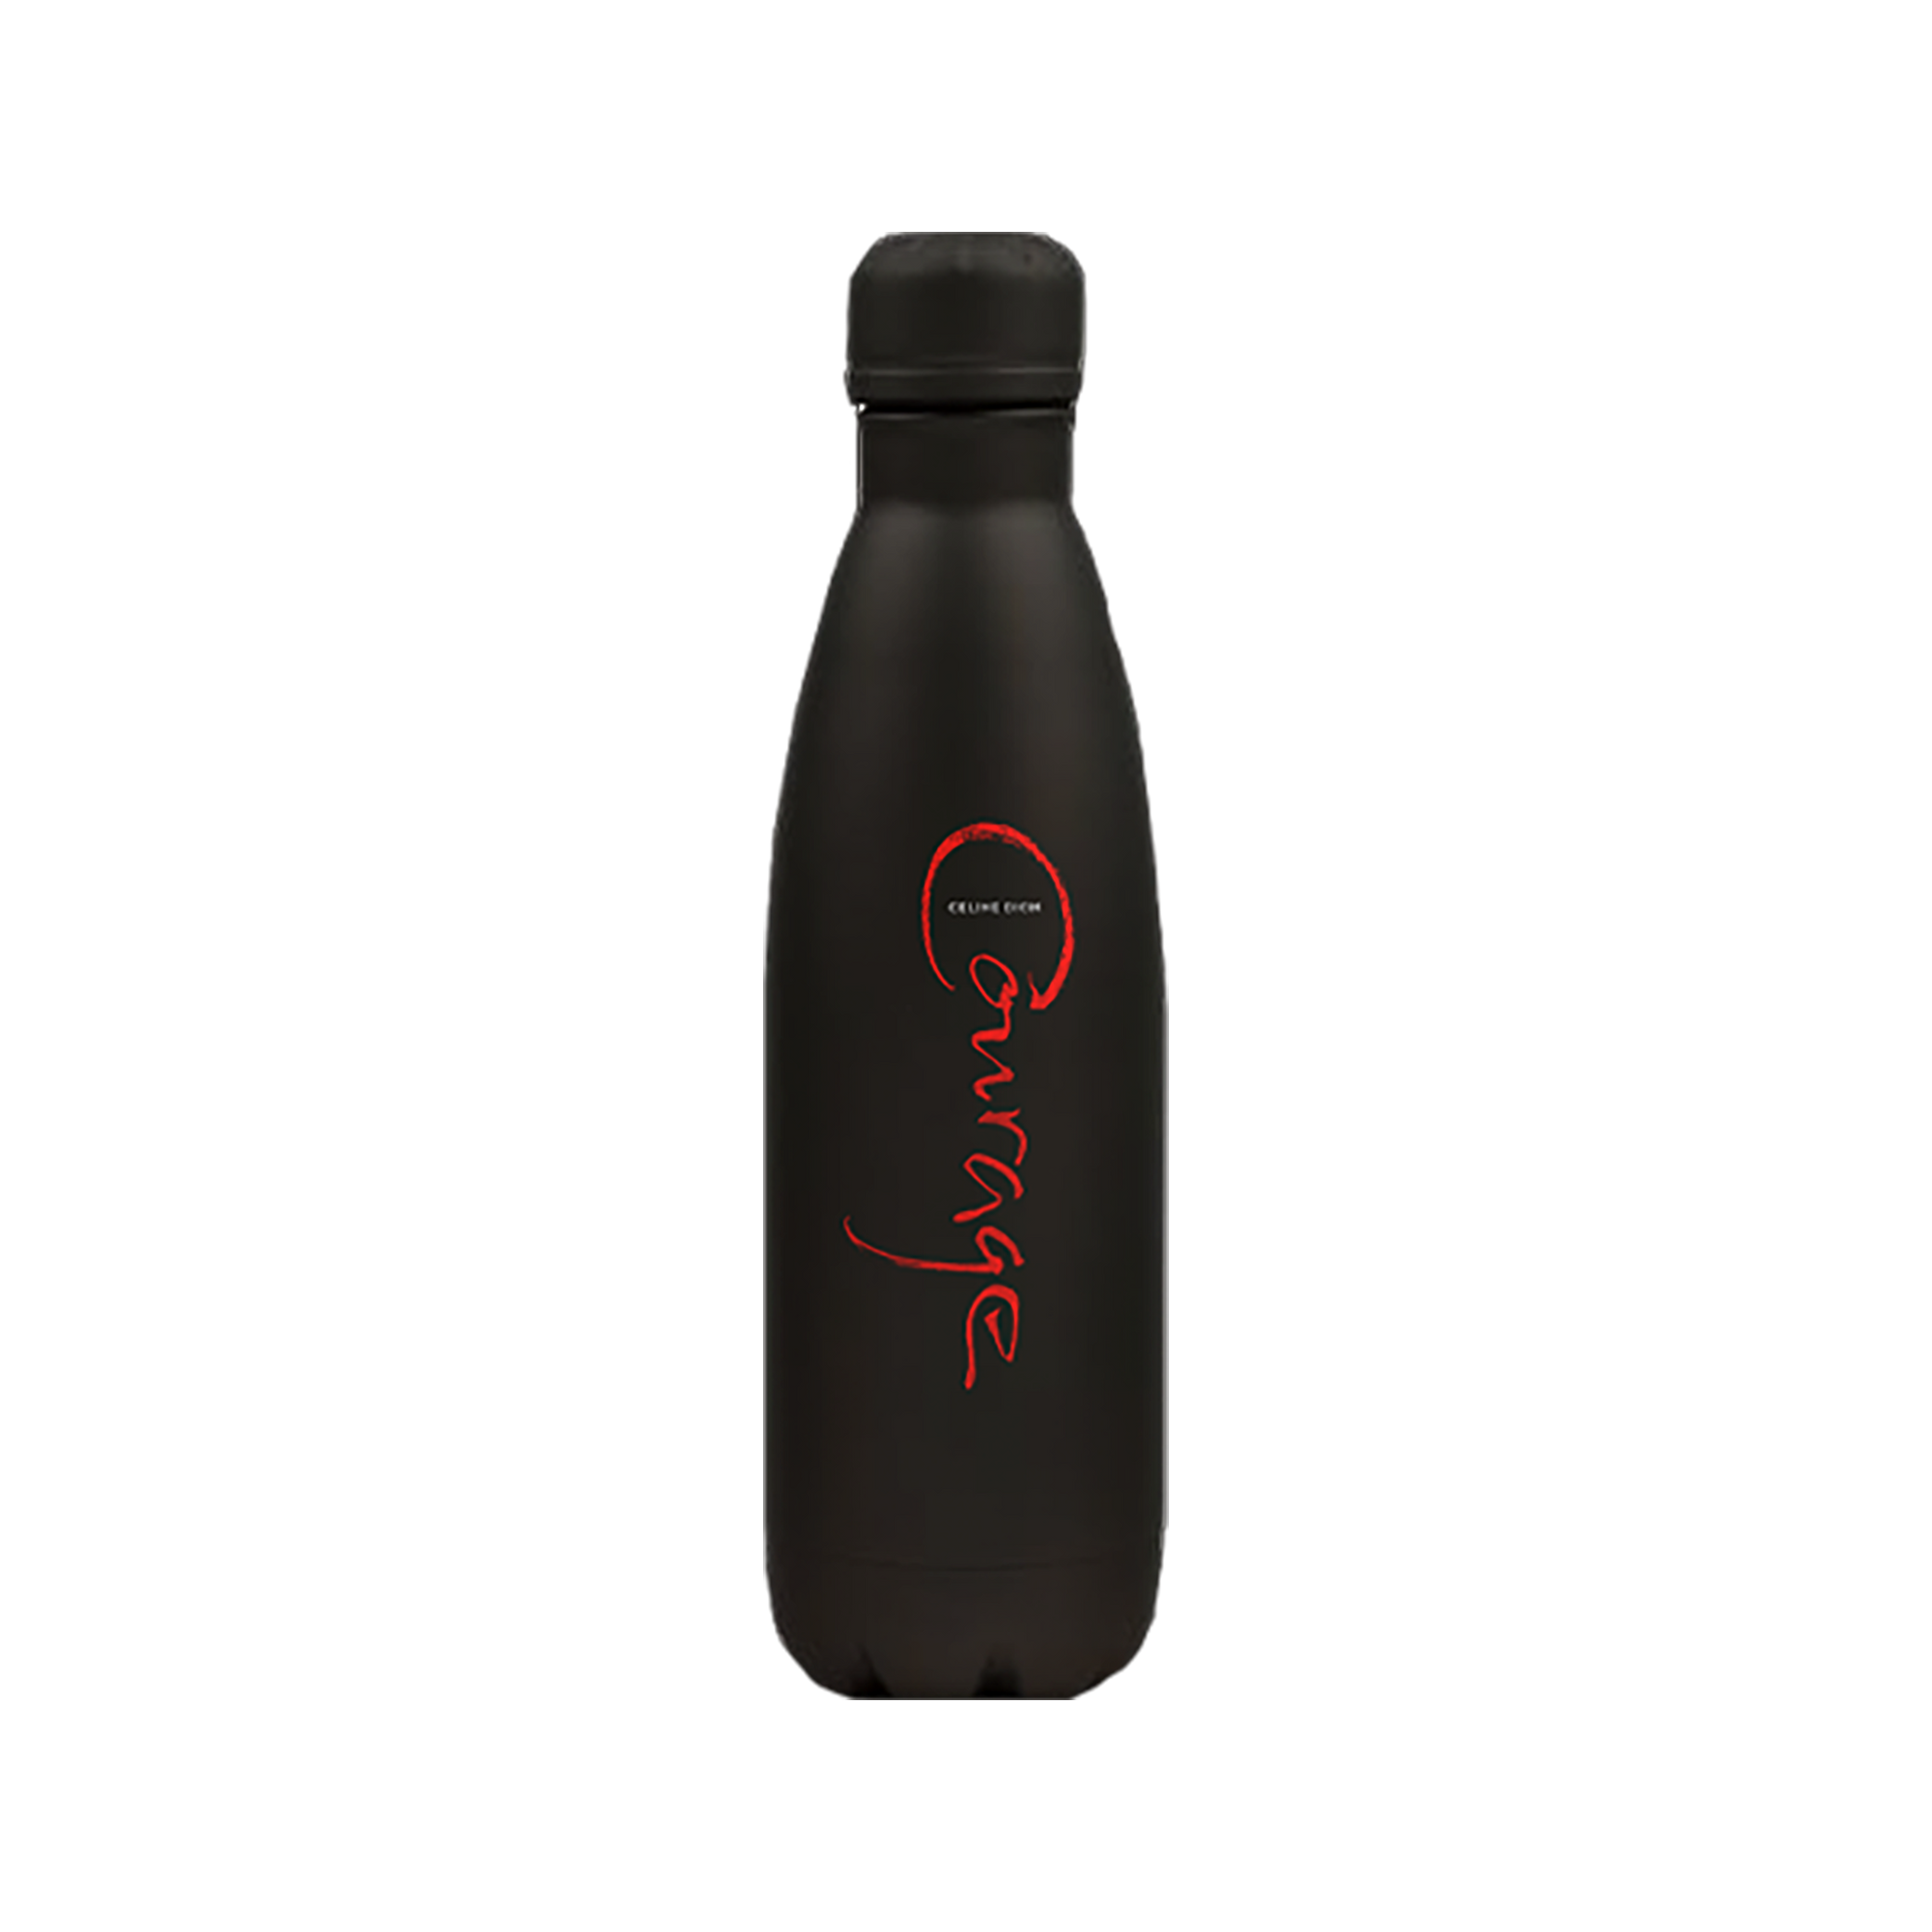 Courage Water Bottle black w/red print